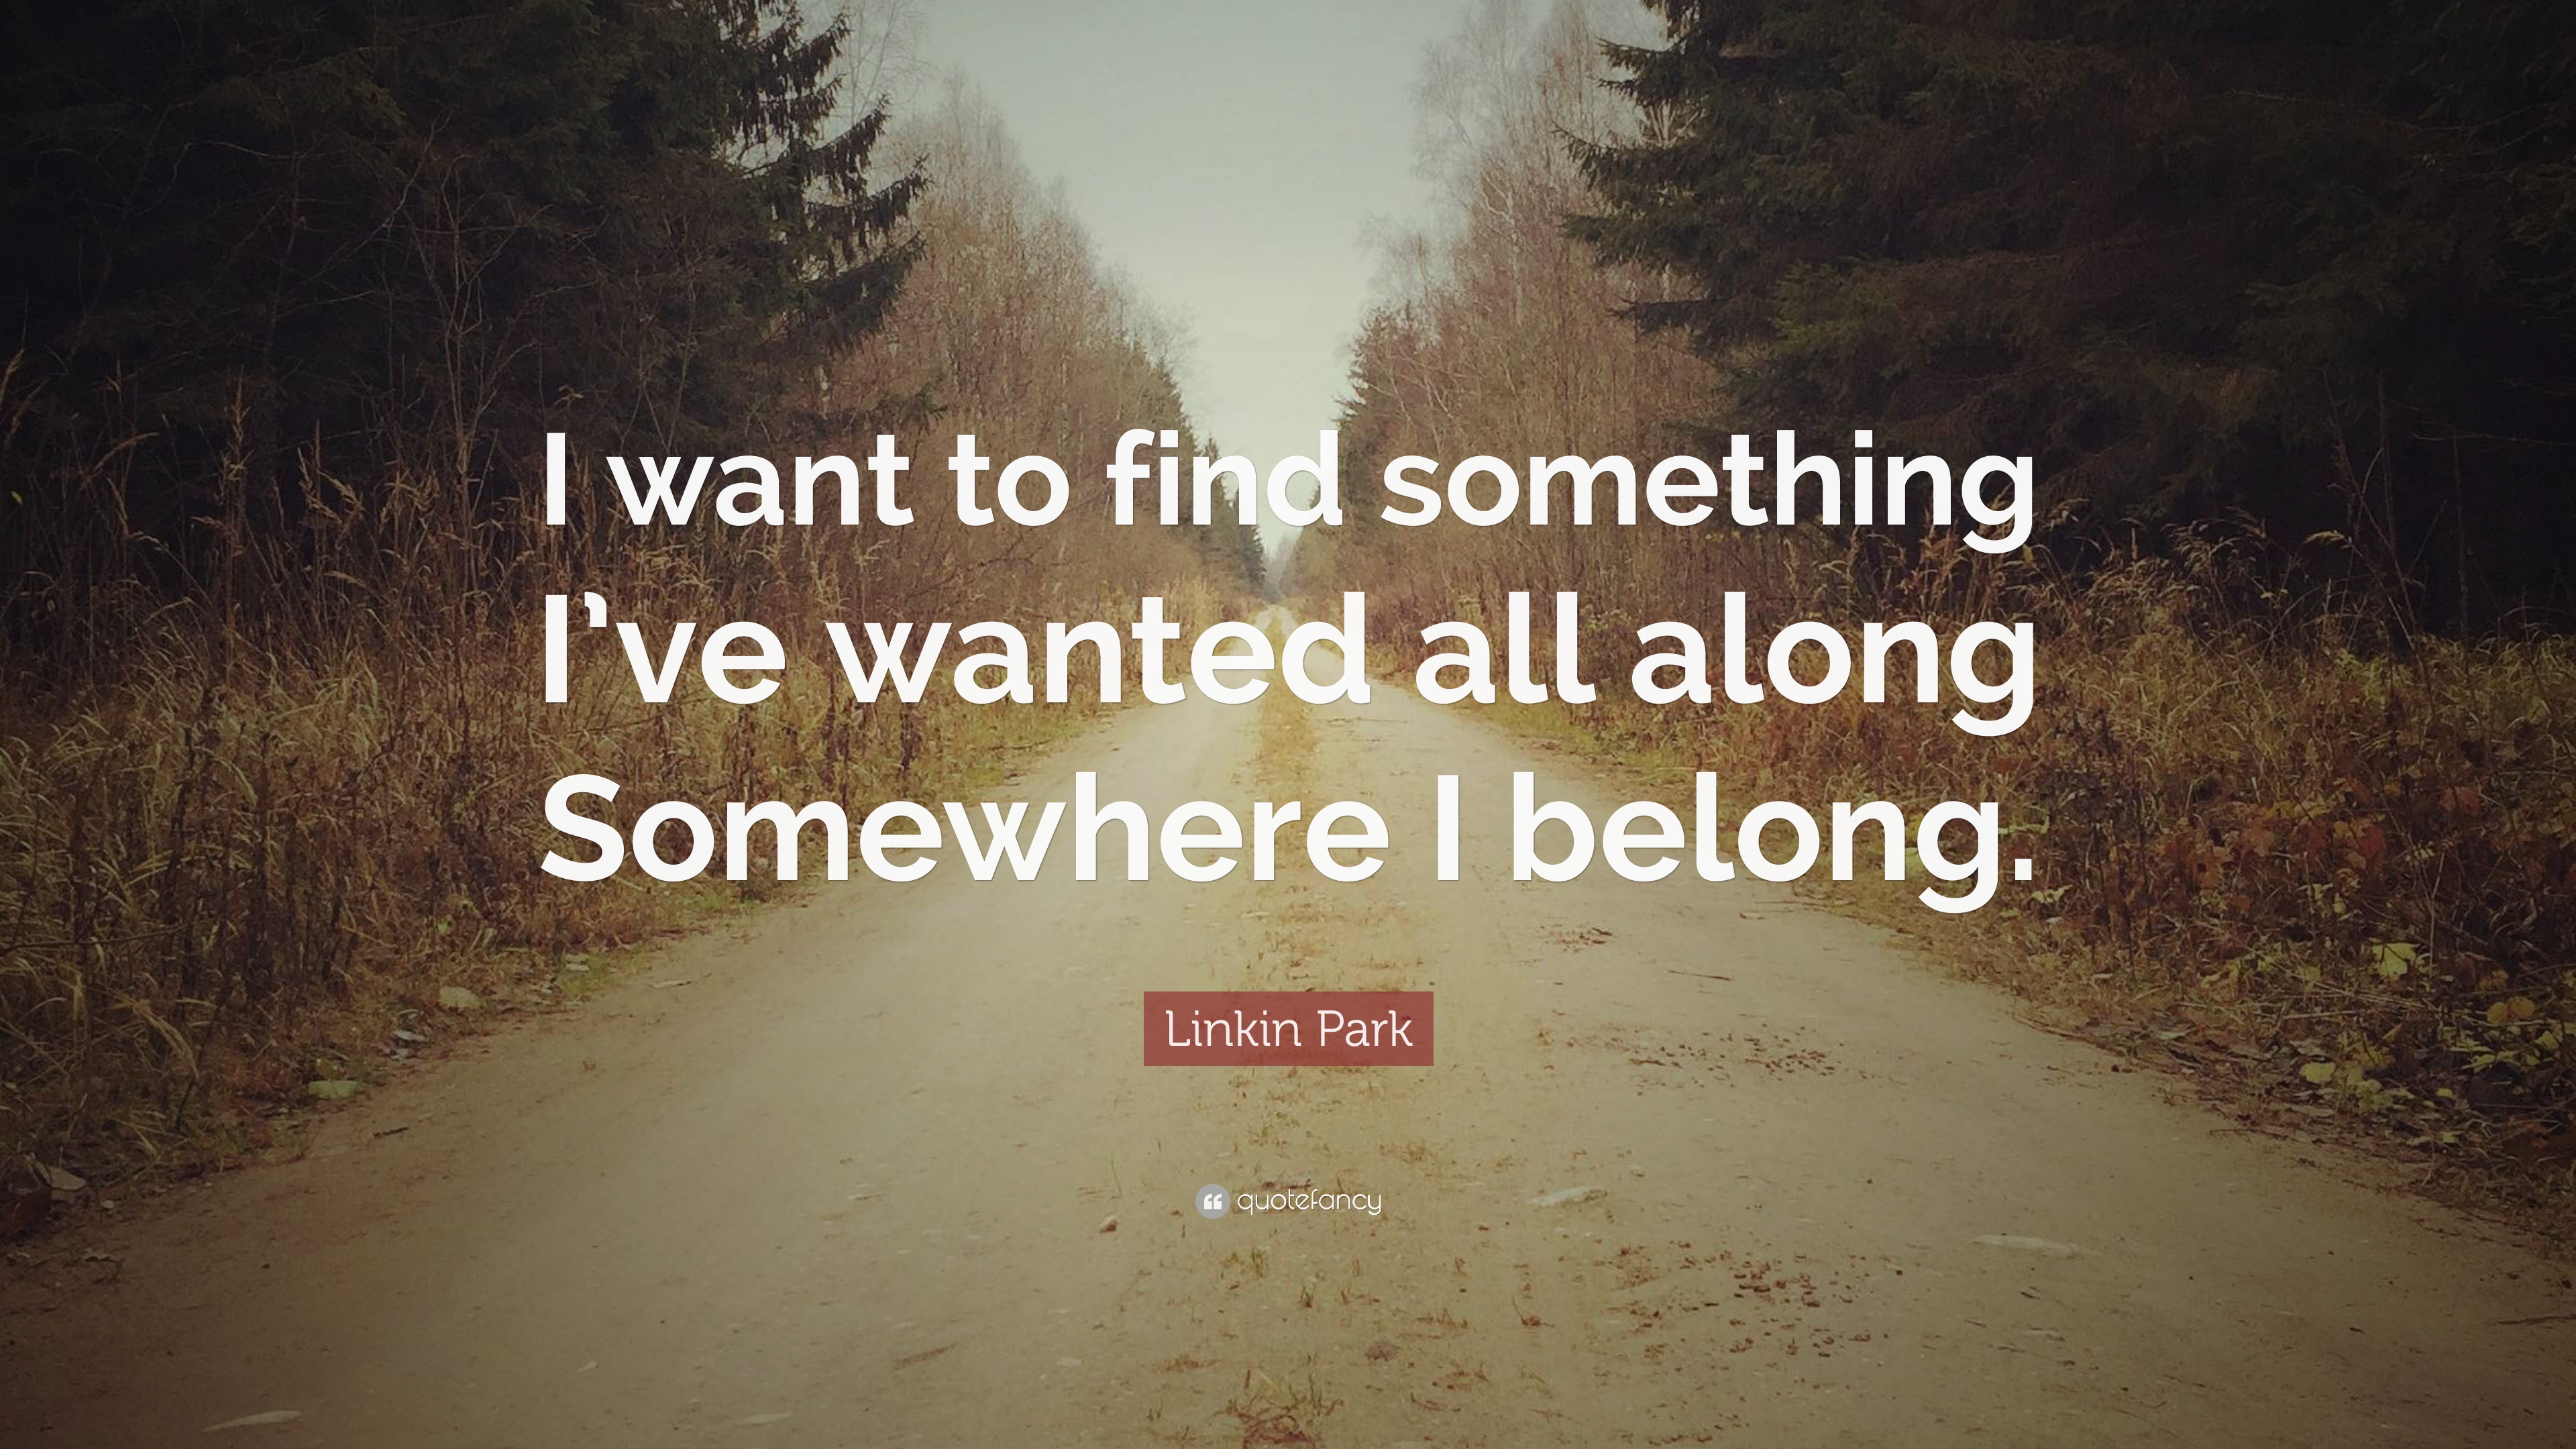 Linkin Park Quote: “I want to find something I've wanted all